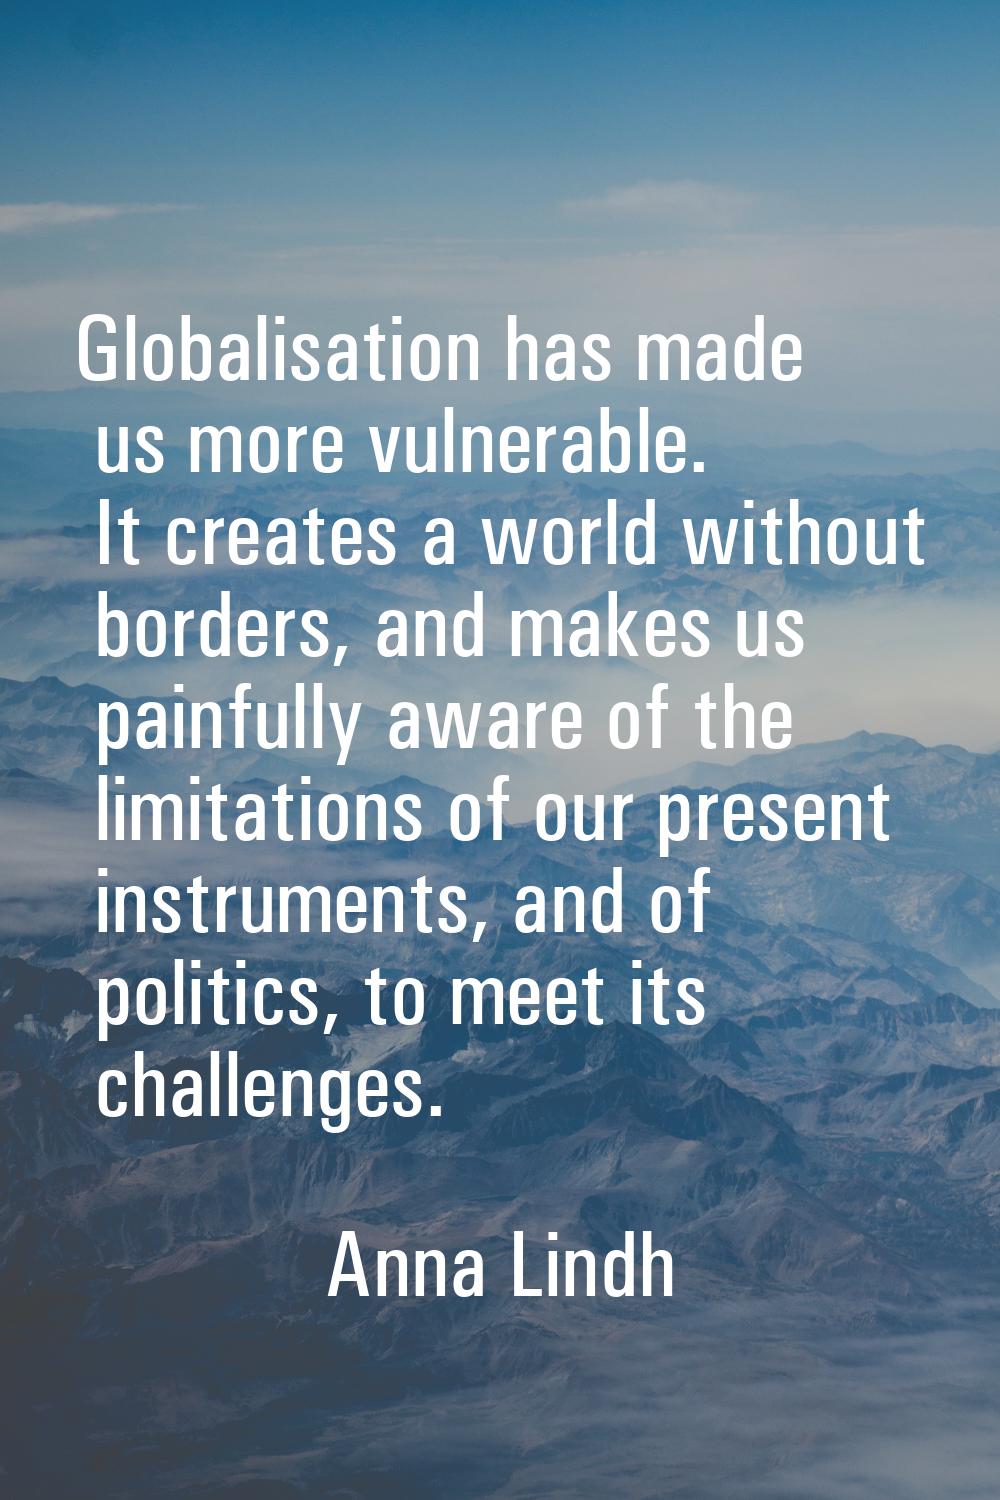 Globalisation has made us more vulnerable. It creates a world without borders, and makes us painful